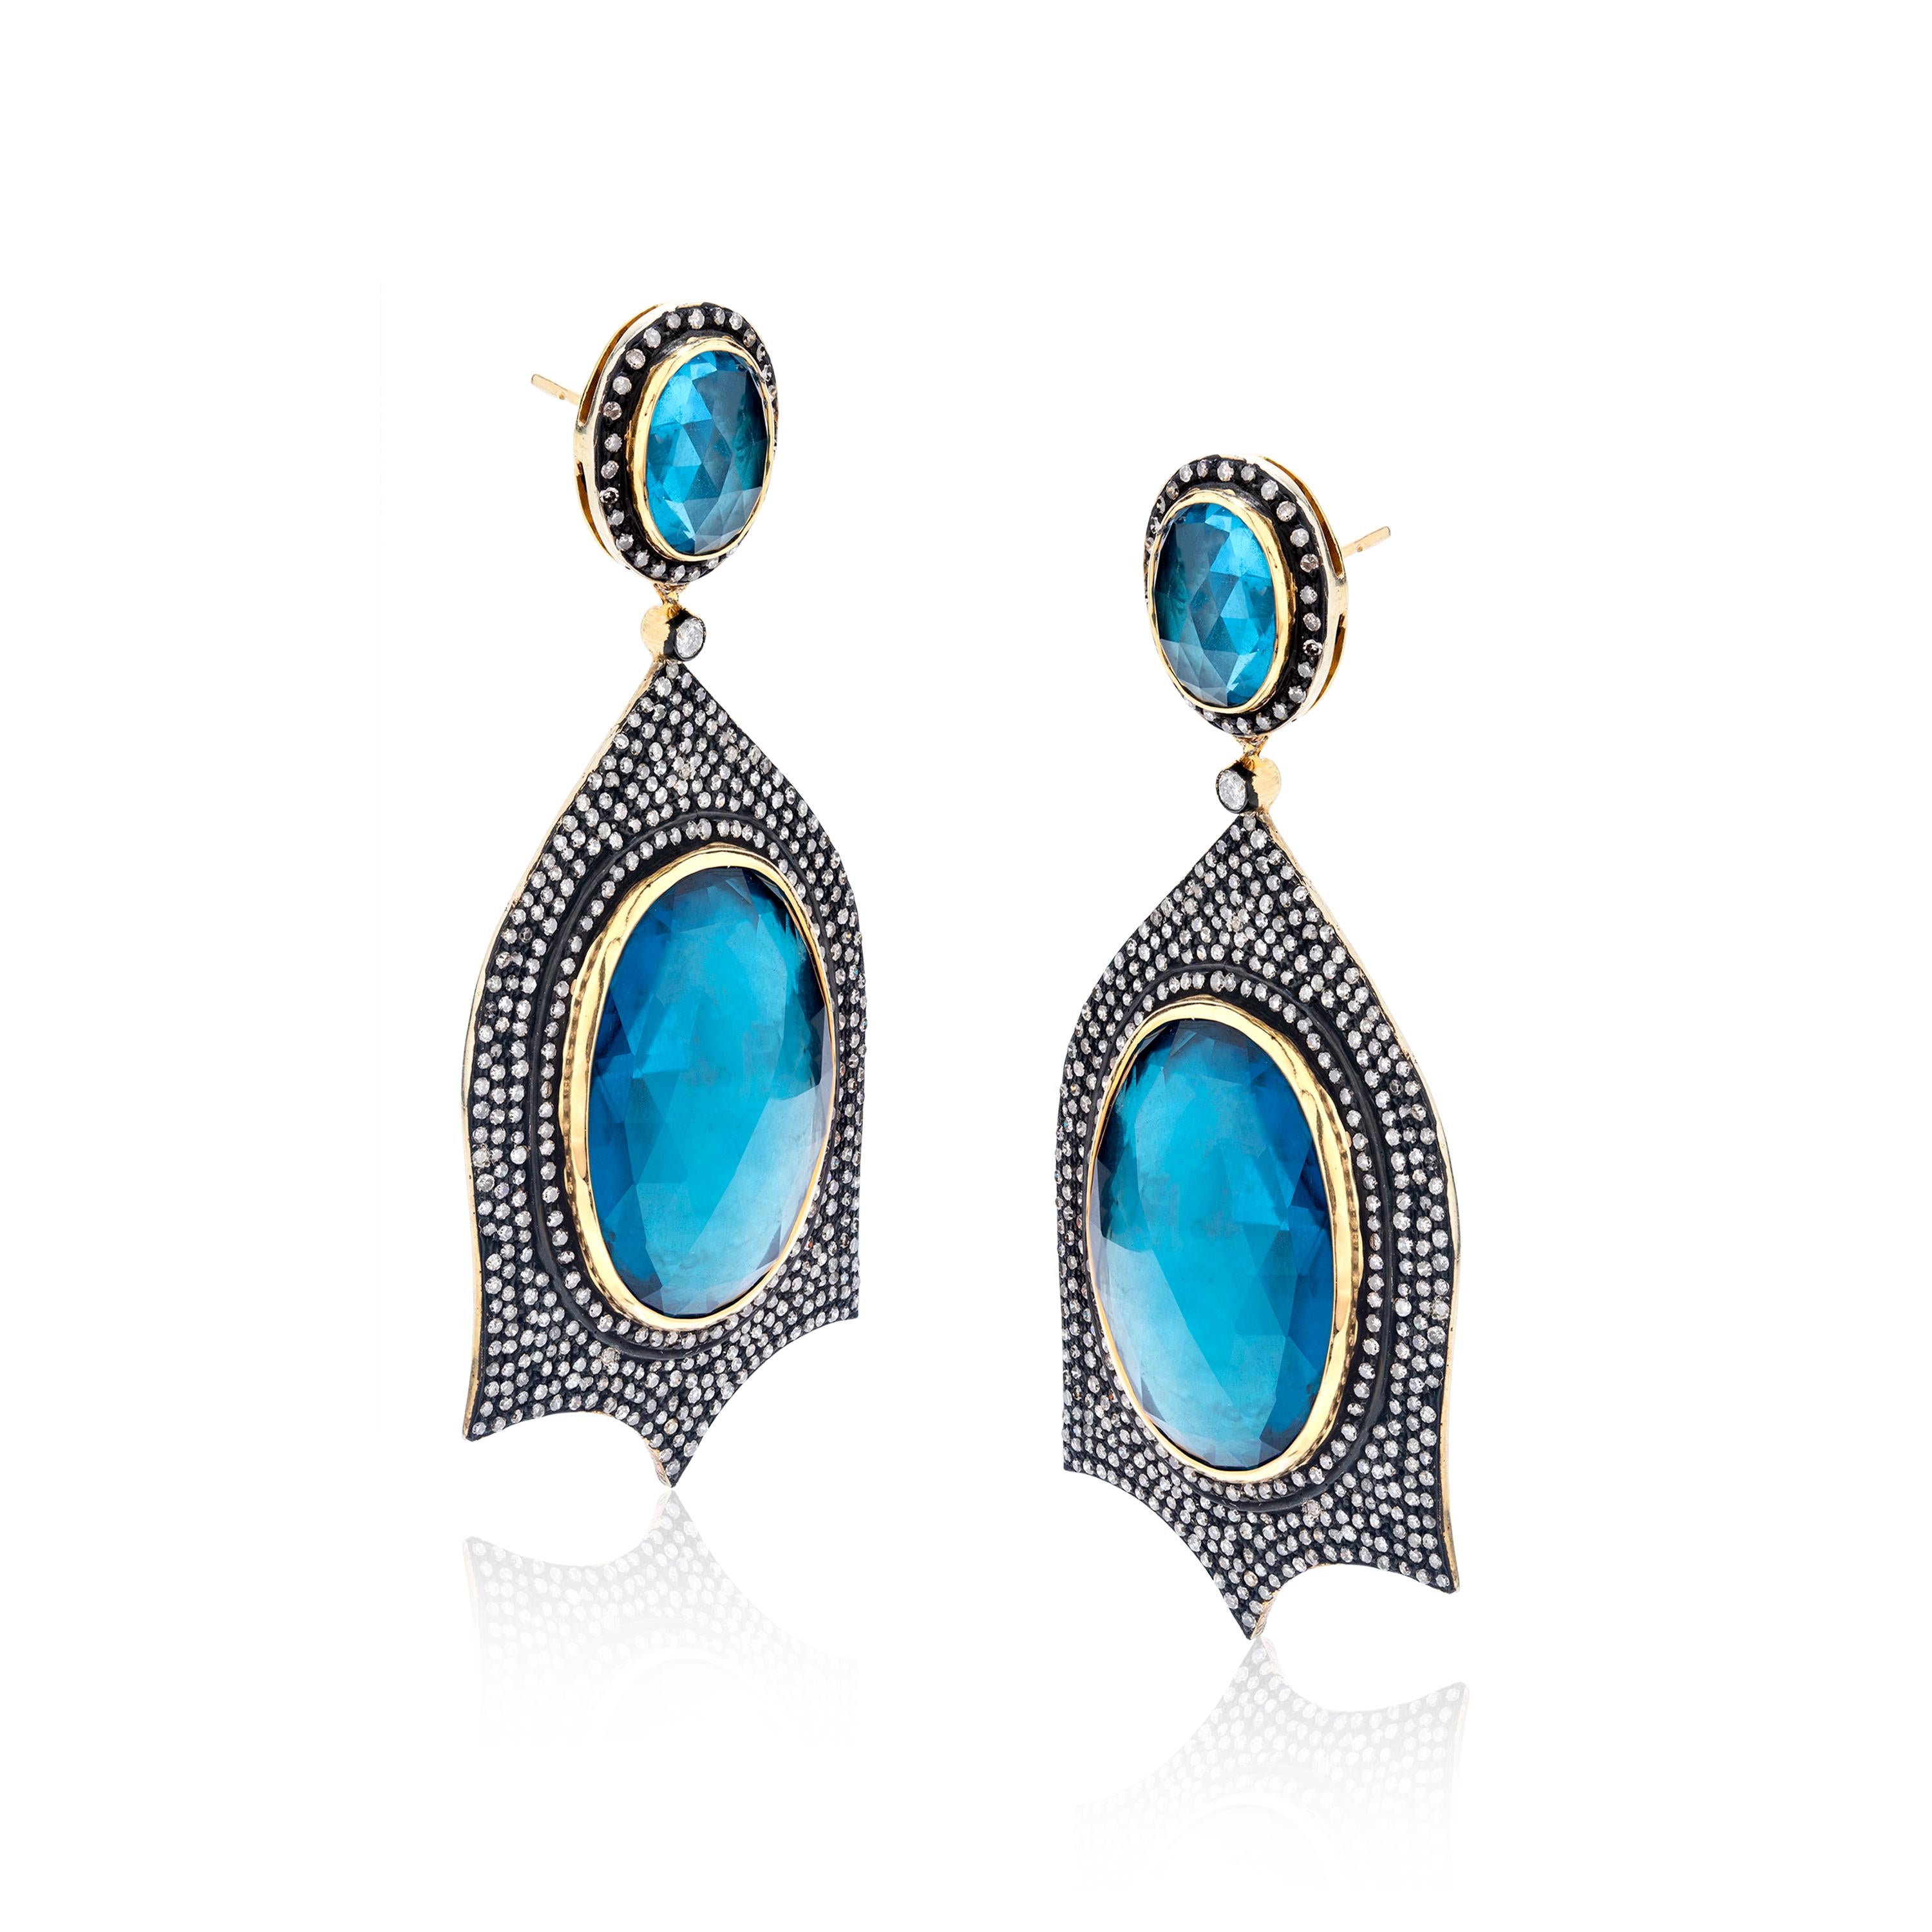 This Gemistry, plush pair of Blue Topaz and Diamond Victorian earrings is mounted on 18K/925 Sterling Silver and Yellow & Black Rhodium. The dangle earpieces are well decorated with diamonds, weighing 8.4 Cts. The diamonds are l in clarity and HI,